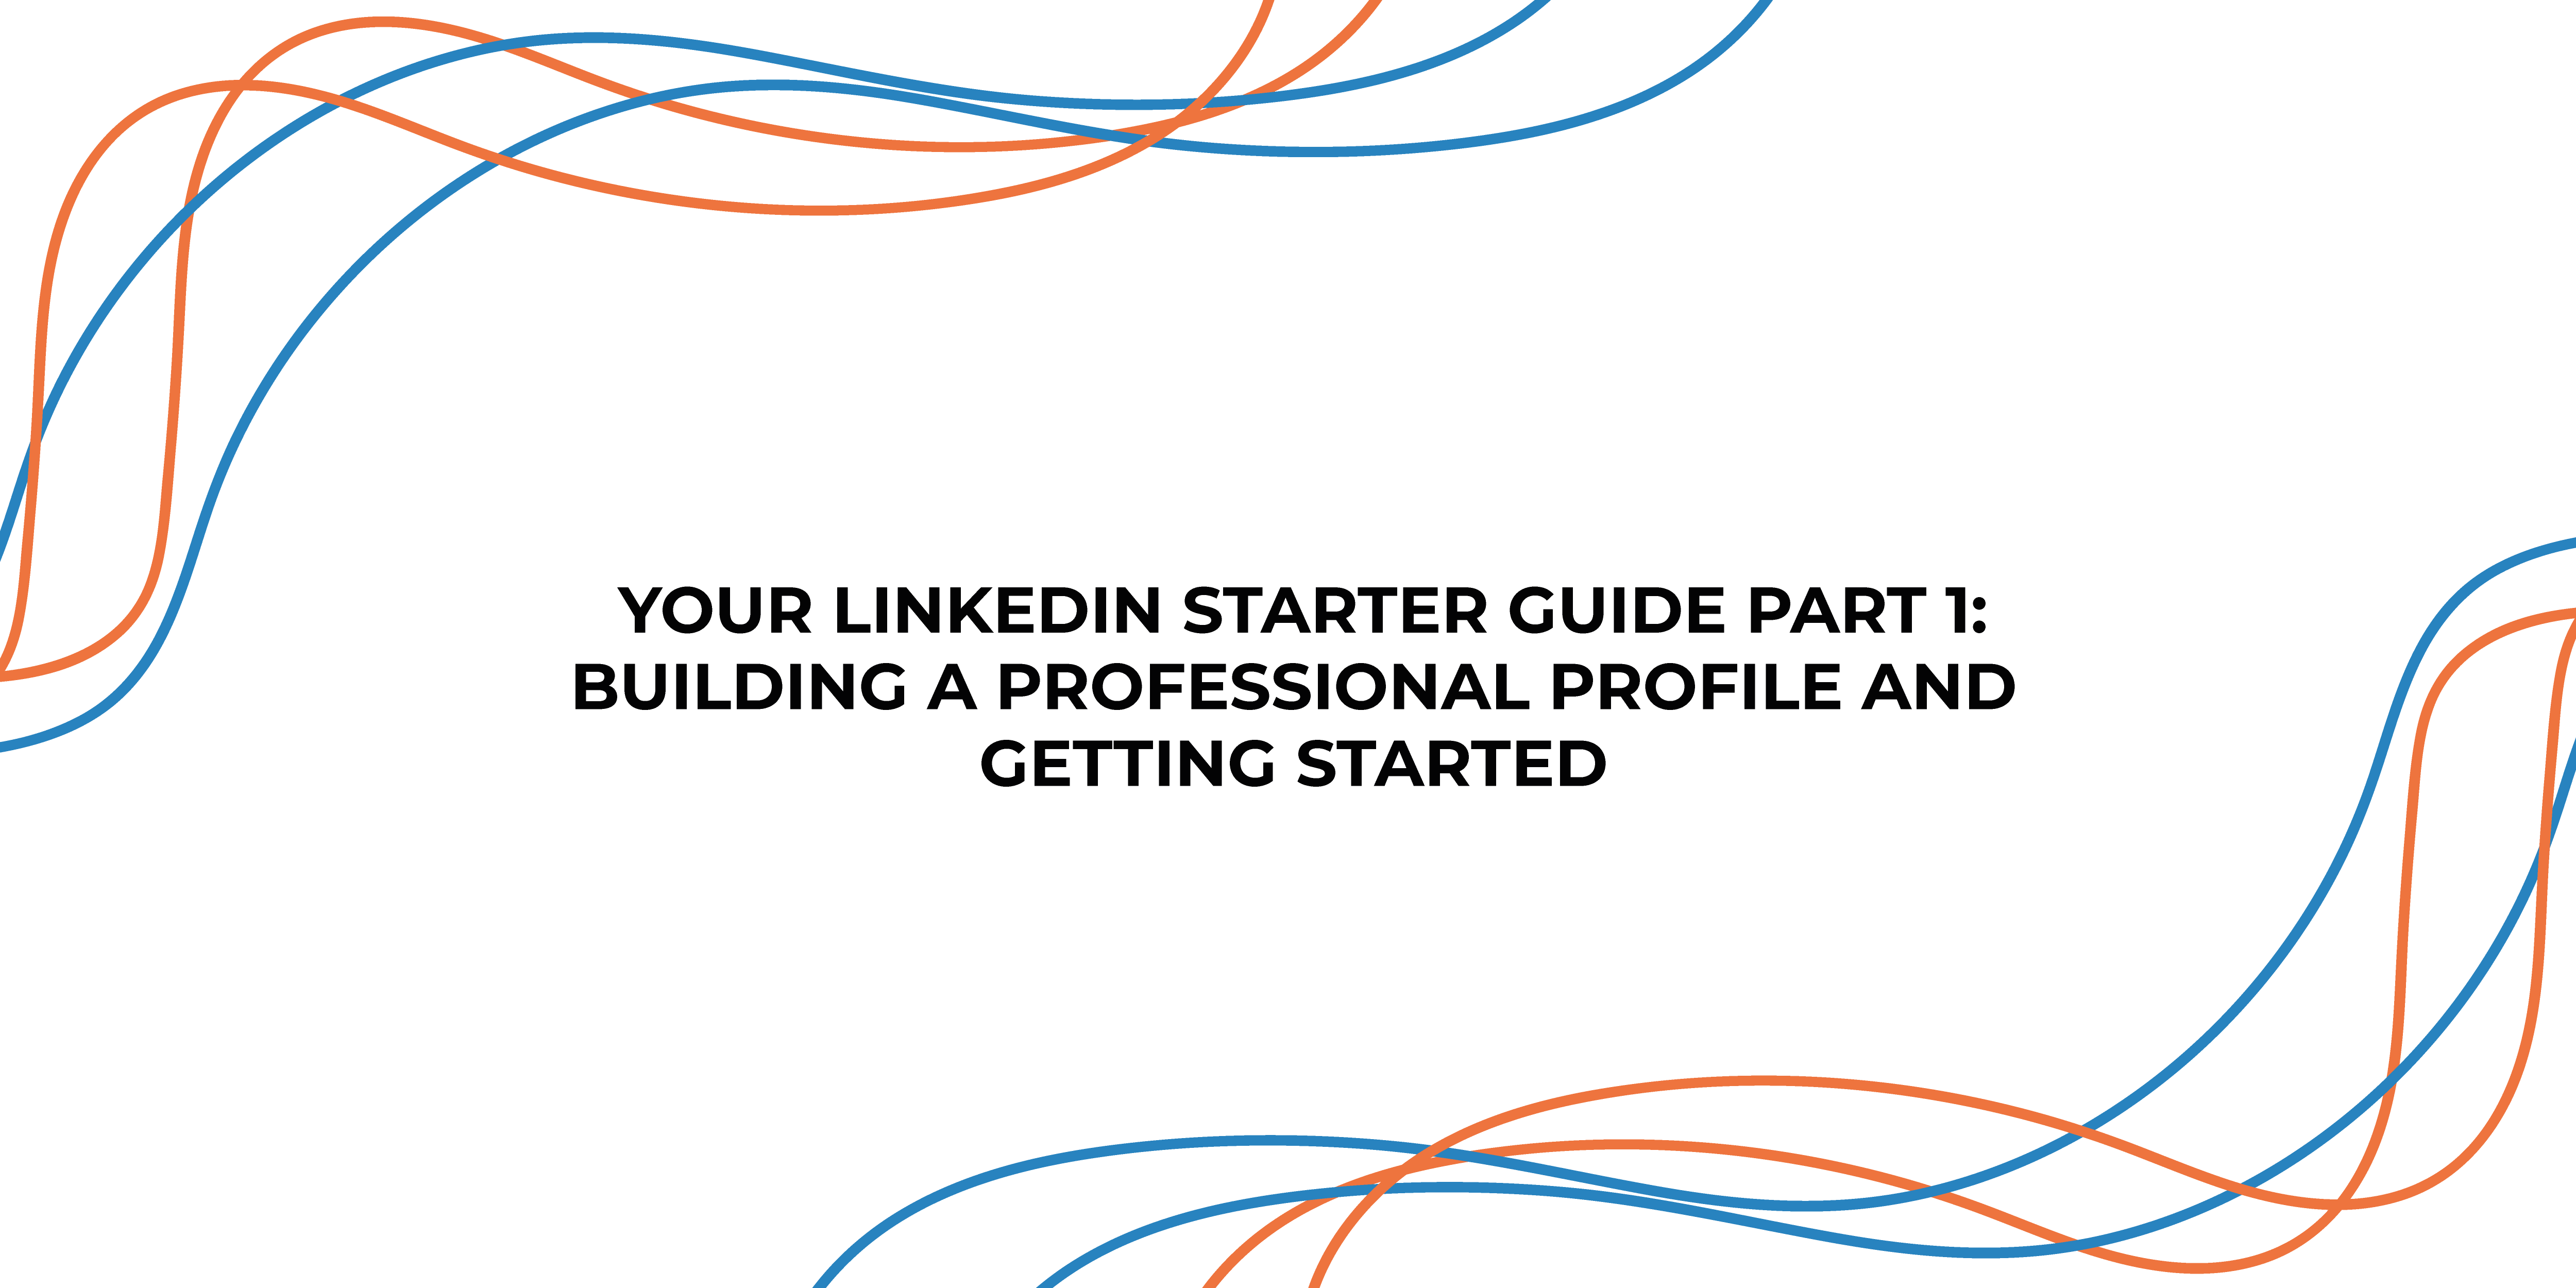 Your LinkedIn Starter Guide Part 1: Building a Professional Profile and Getting Started